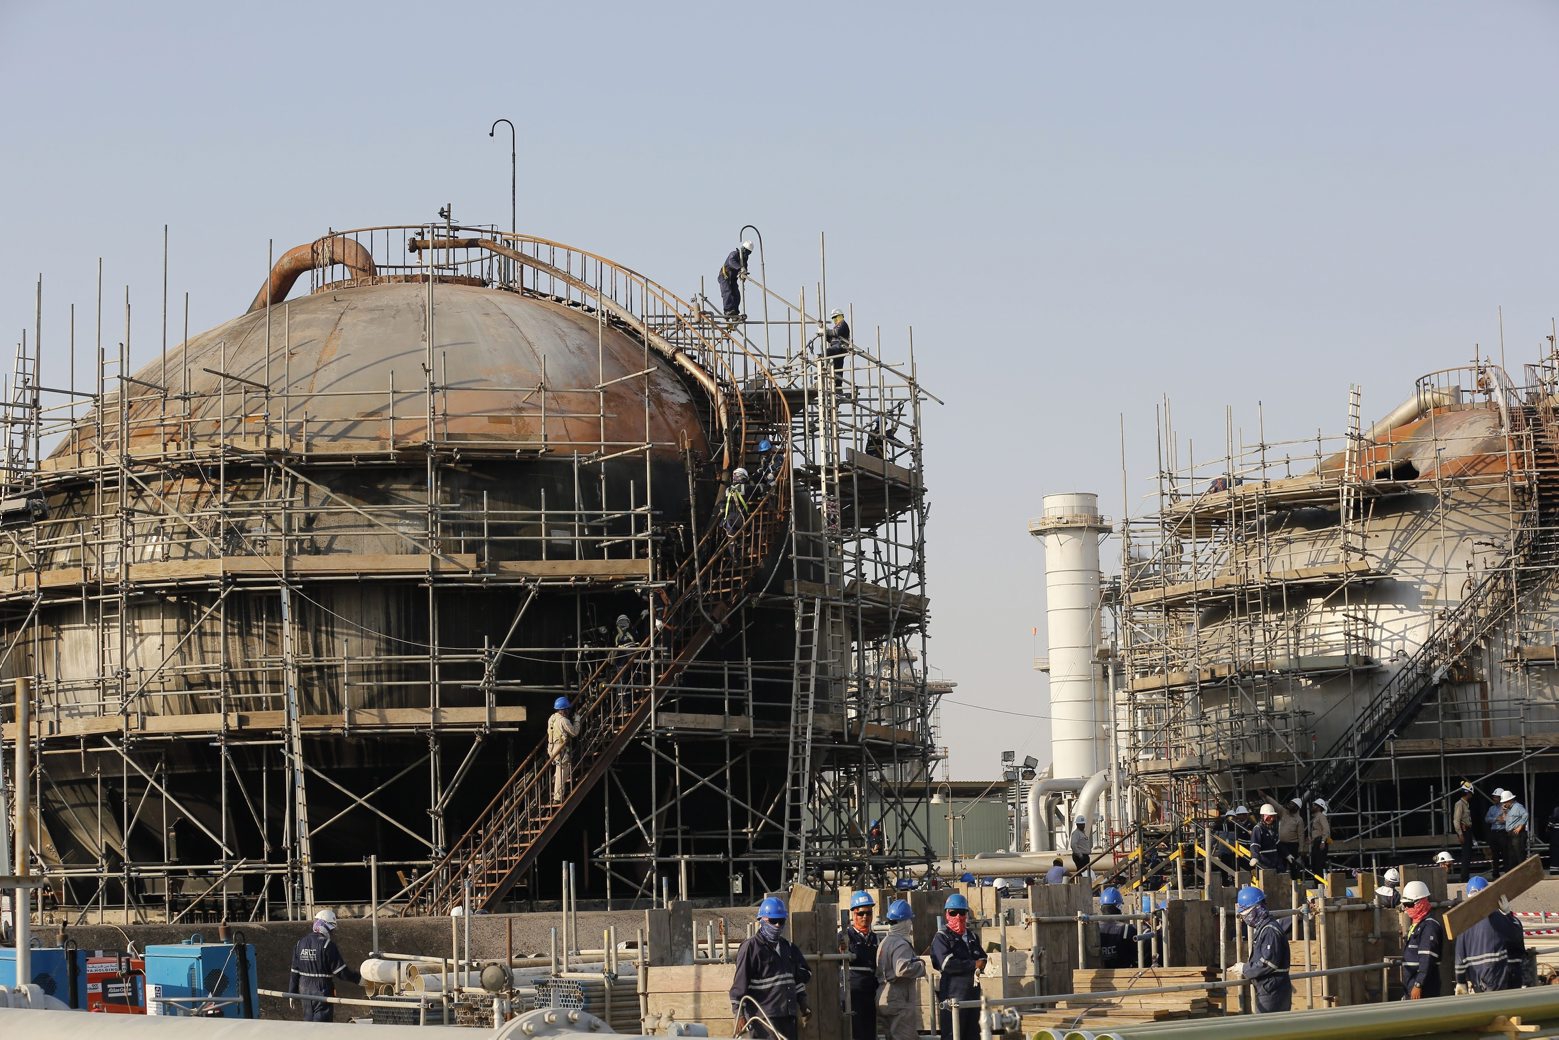 FILE- In this Sept. 20, 2019 file photo taken during a trip organized by Saudi information ministry, workers fix the damage in Aramco's oil separator at processing facility after the recent Sept. 14 attack in Abqaiq, near Dammam in the Kingdom's Eastern Province. Saudi Arabia has formally announced the start of its initial public offering of the state-run oil giant Saudi Aramco. (AP Photo/Amr Nabil, File) Saudi Arabia Aramco